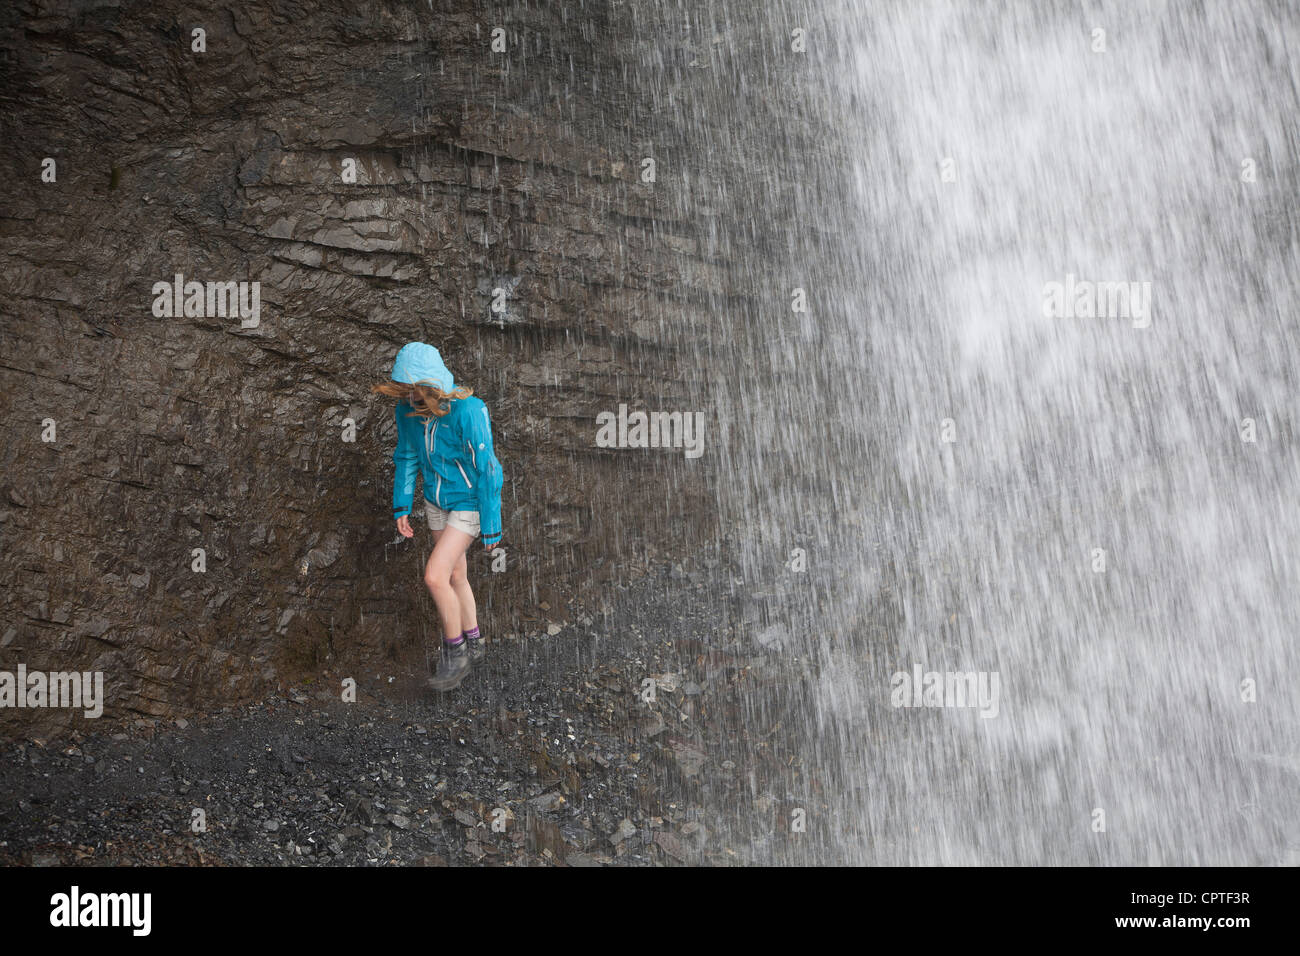 Child walking behind a waterfall in the Trafoi Valley, Italy Stock Photo